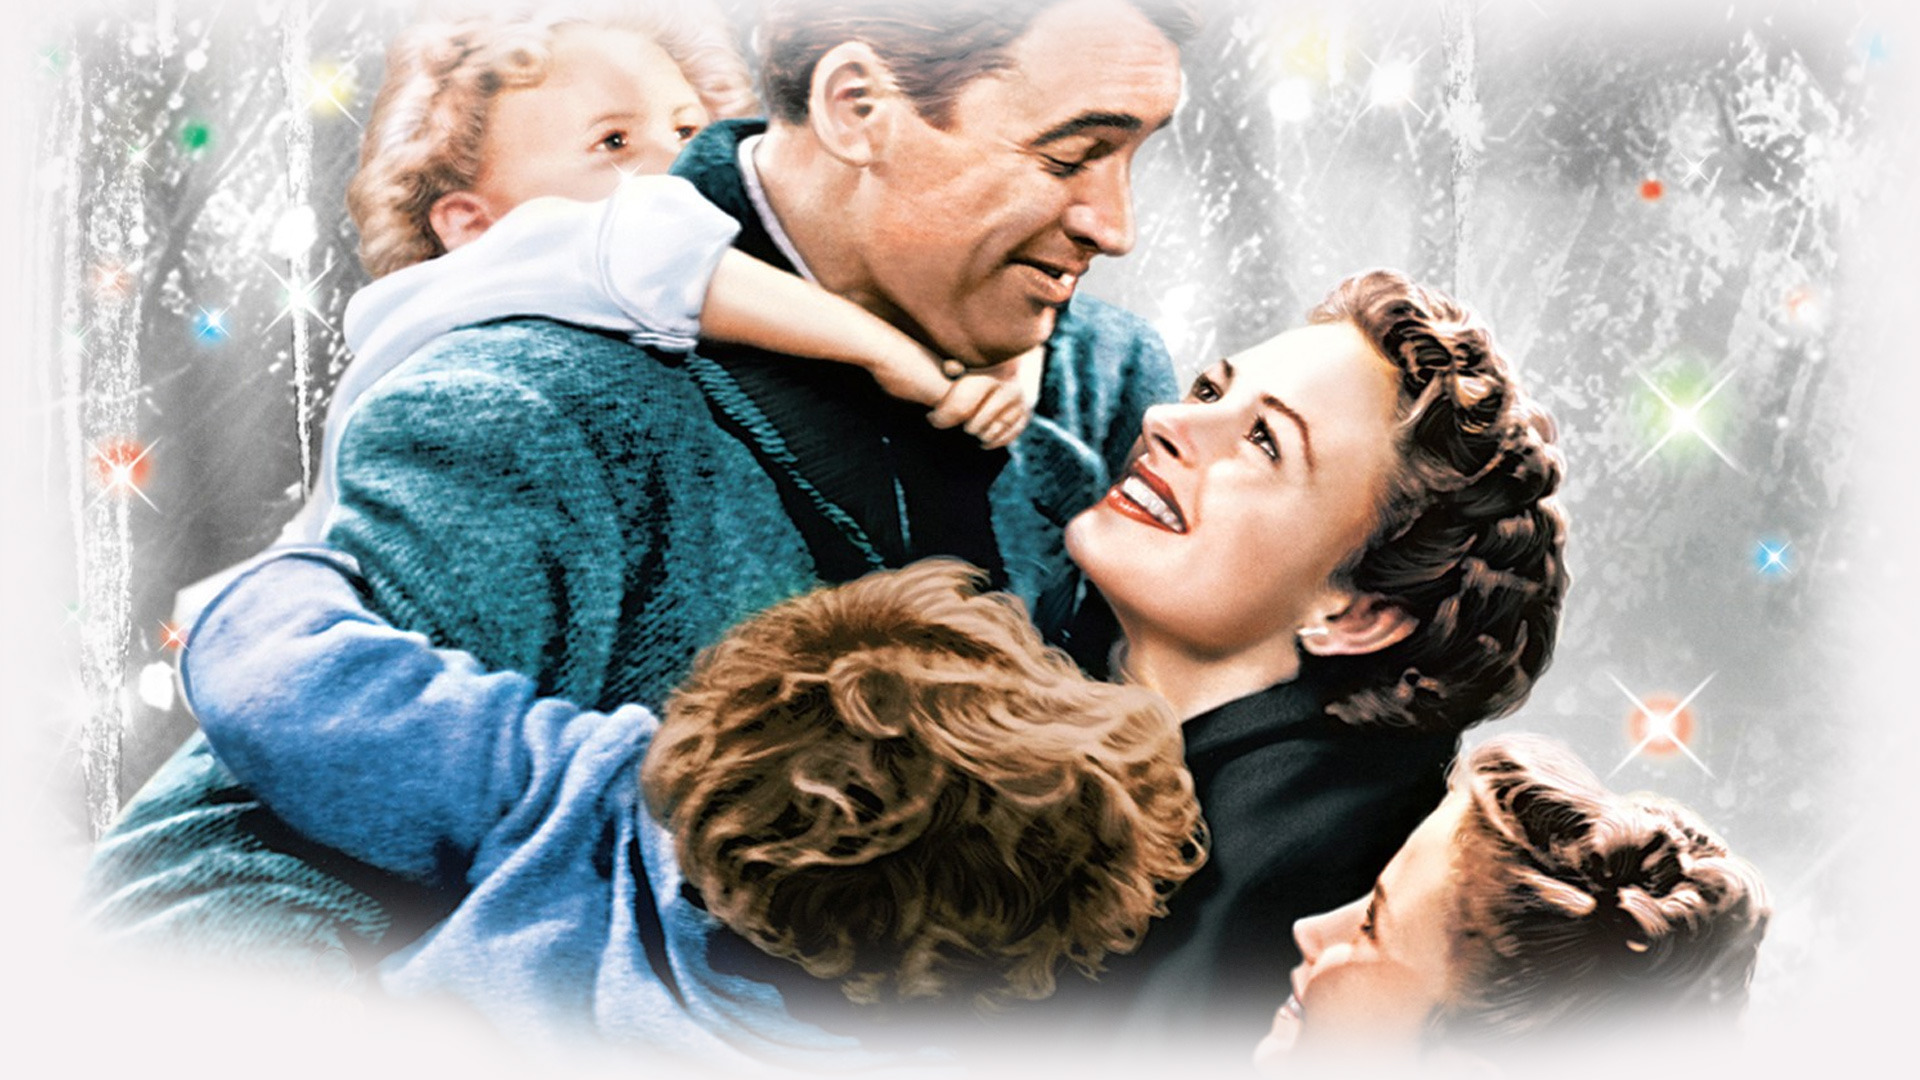 HD Wallpaper: It's a Wonderful Life. Download Now!